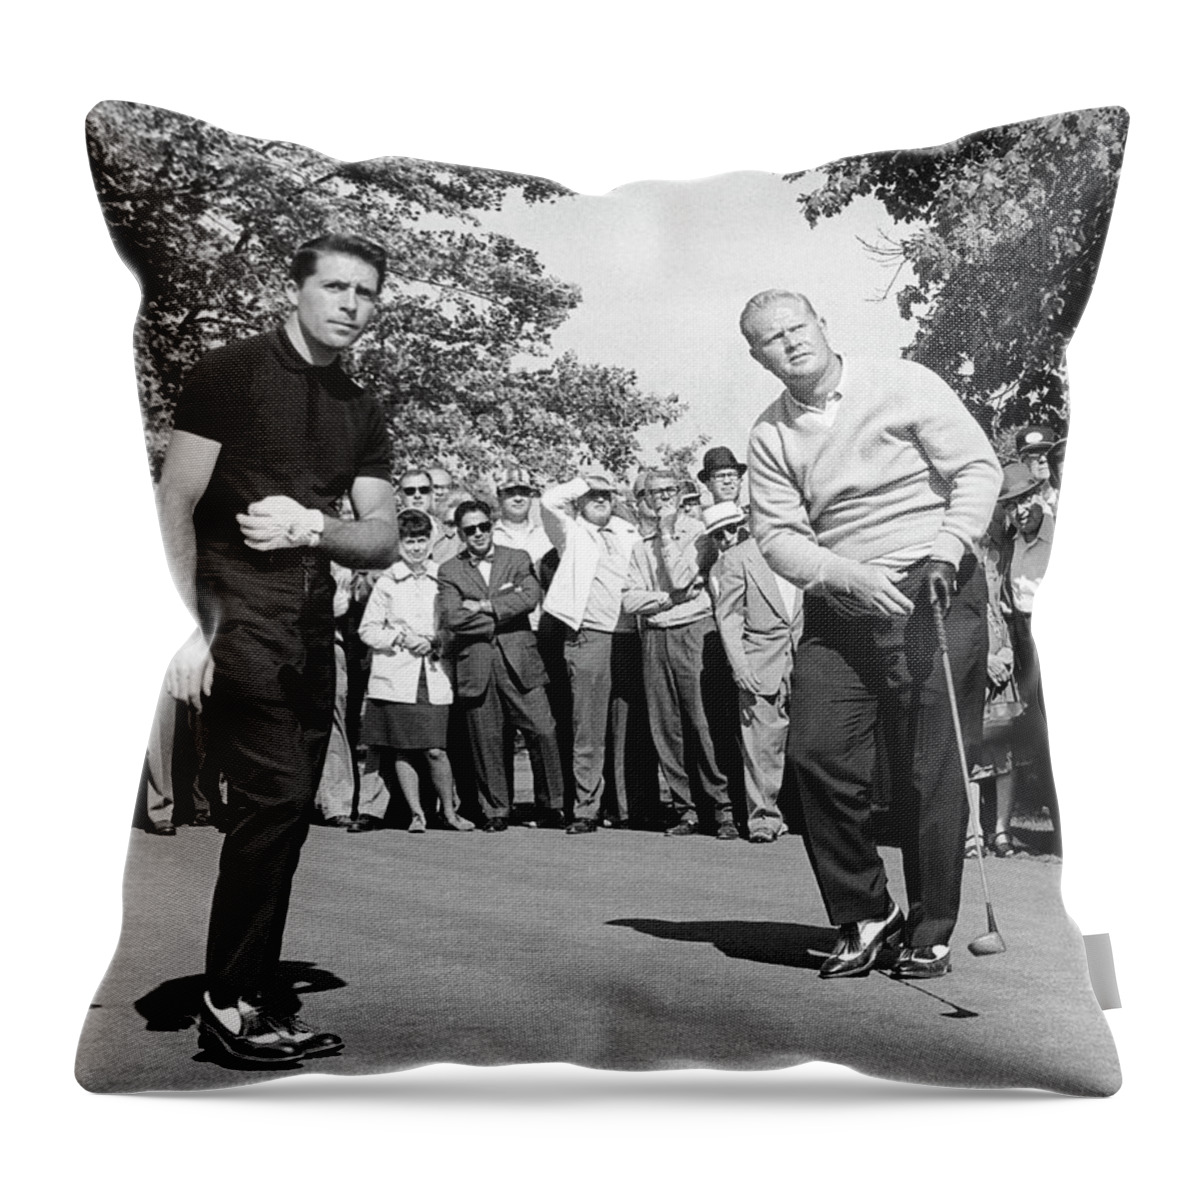 1965 Throw Pillow featuring the photograph Palmer, Player And NIcklaus by Underwood Archives